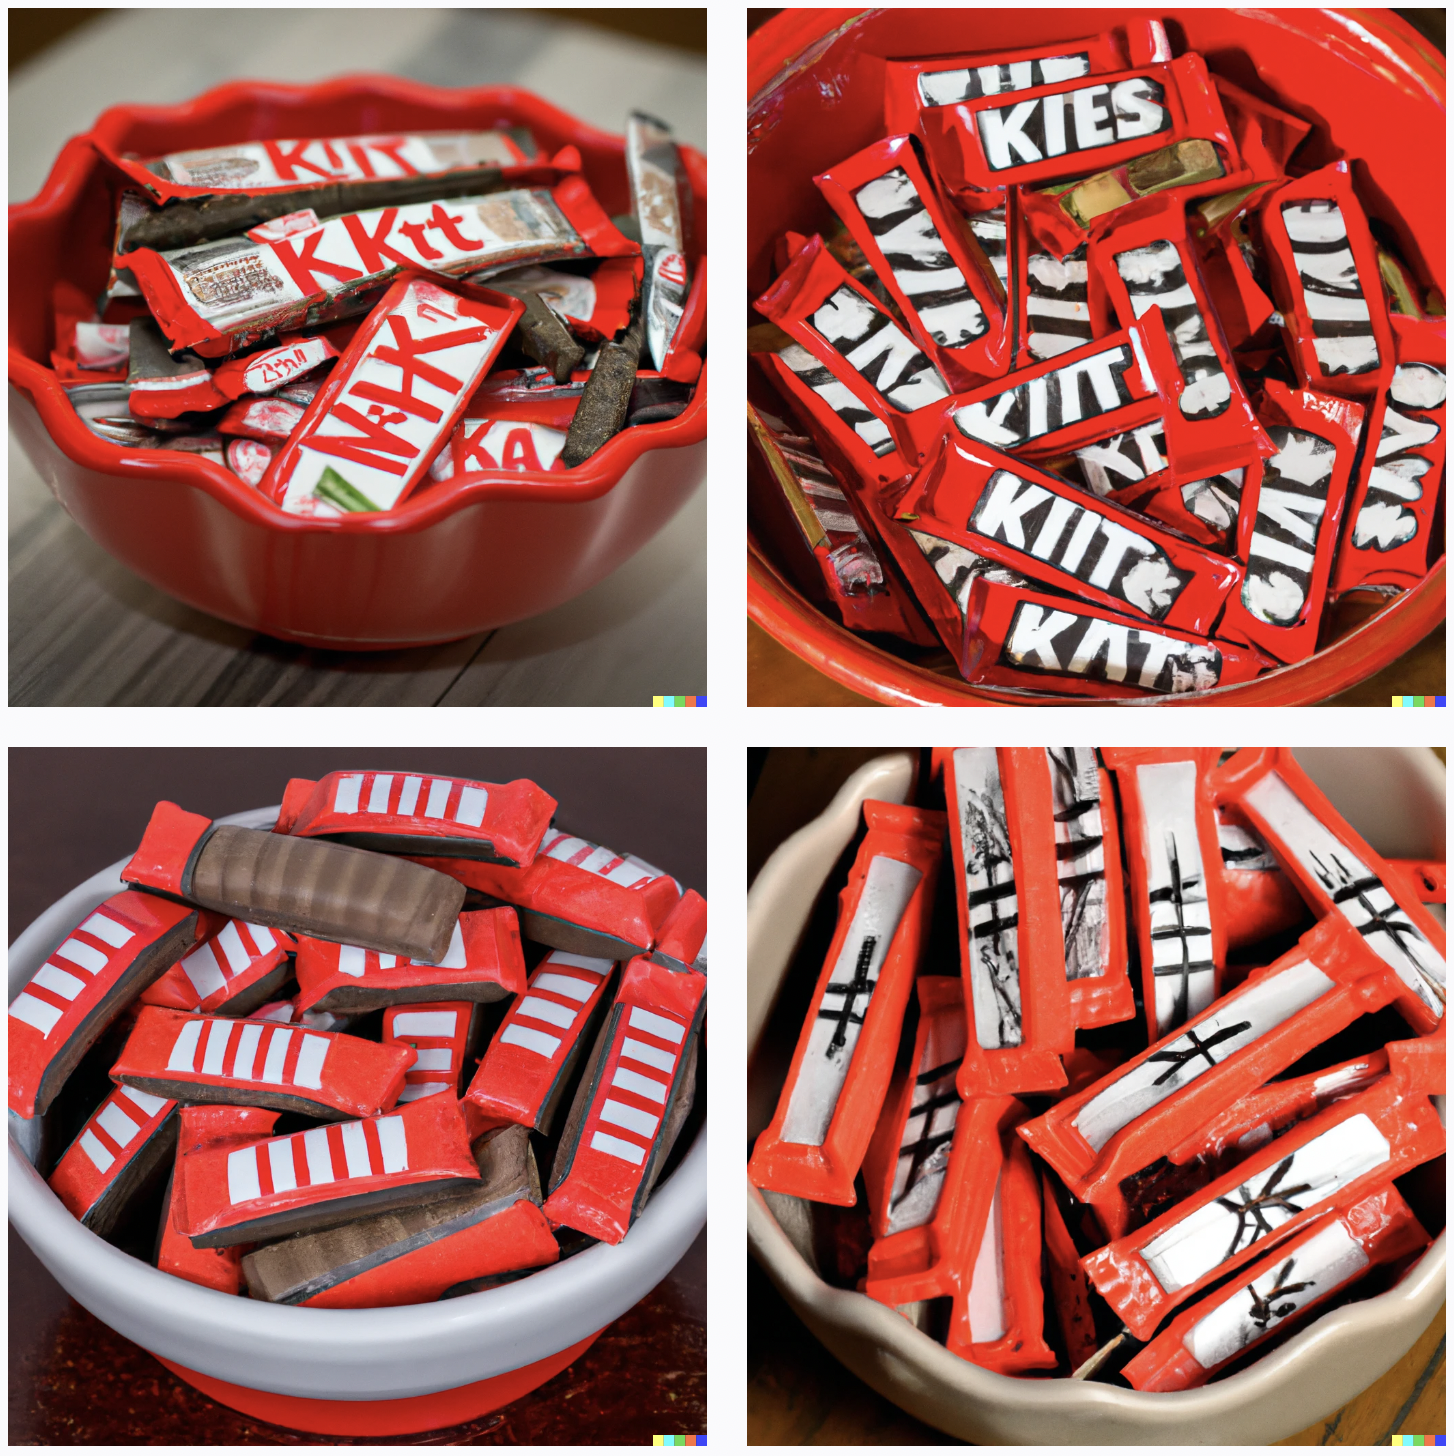 Bowls contain small red-wrapped candy bars, although some are partially unwrapped. Some say "Kiit" or "Kkit", while the candies in other bowls just have white bars or black lines on them.